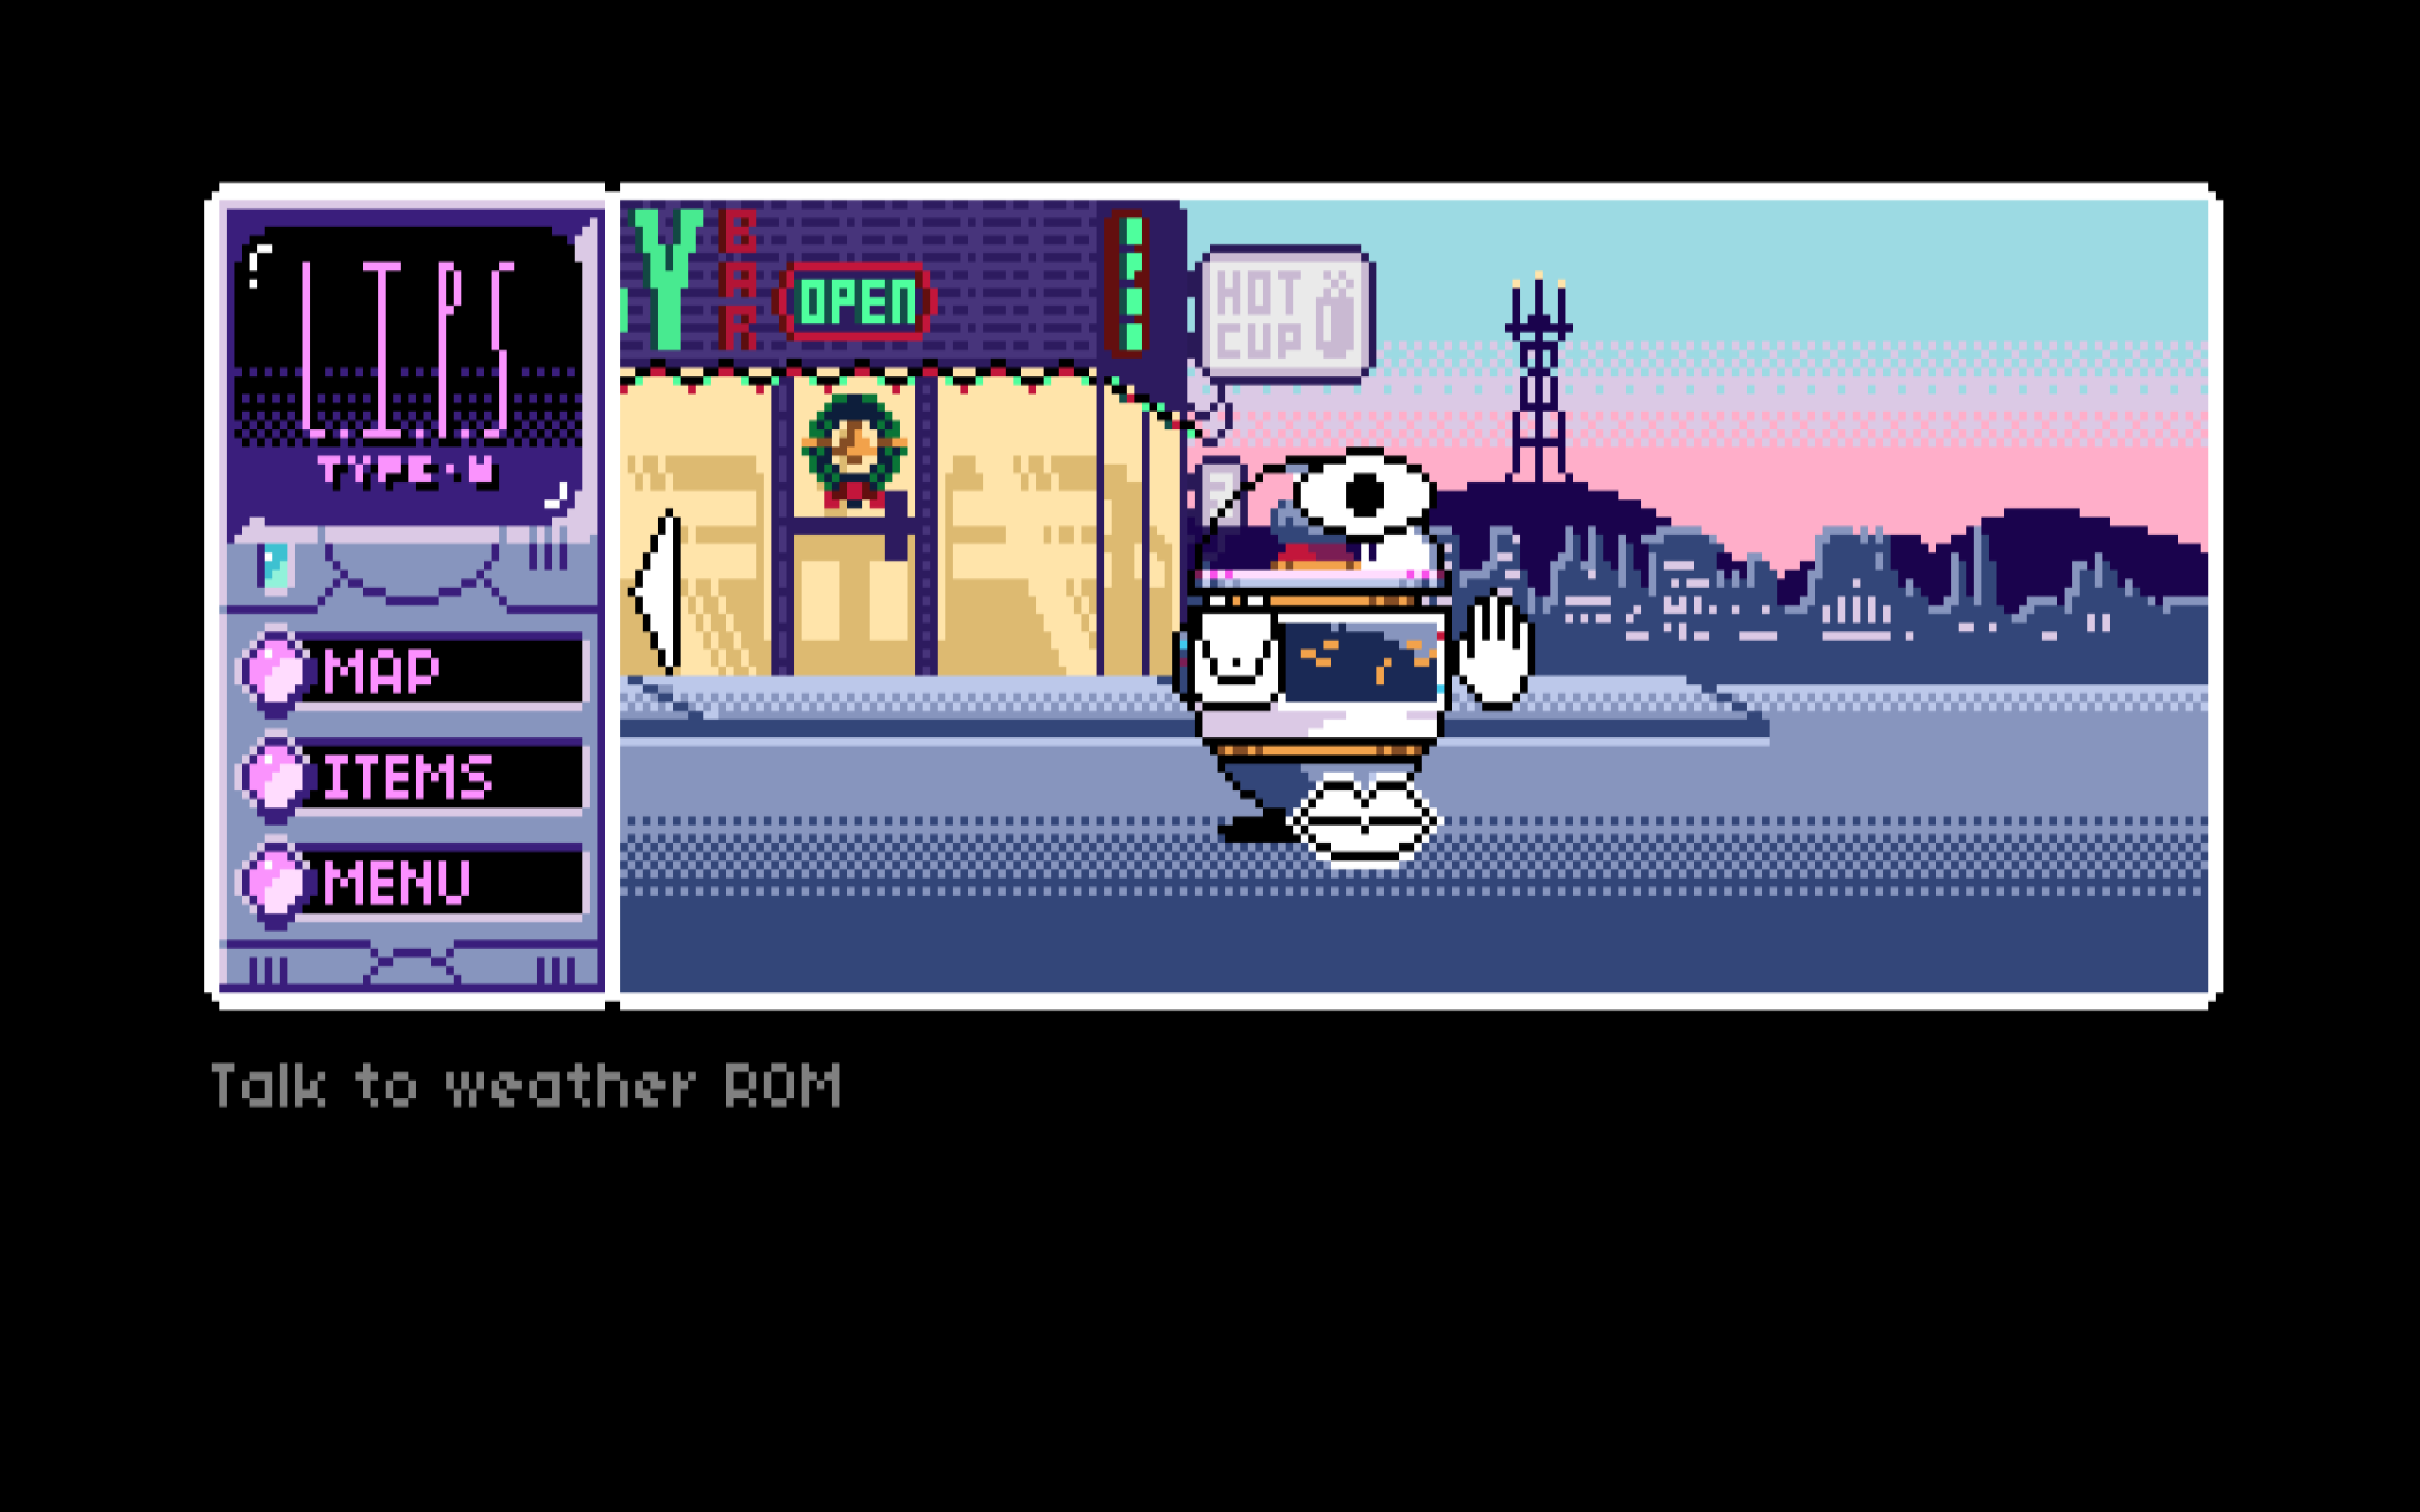 Read Only Memories #7